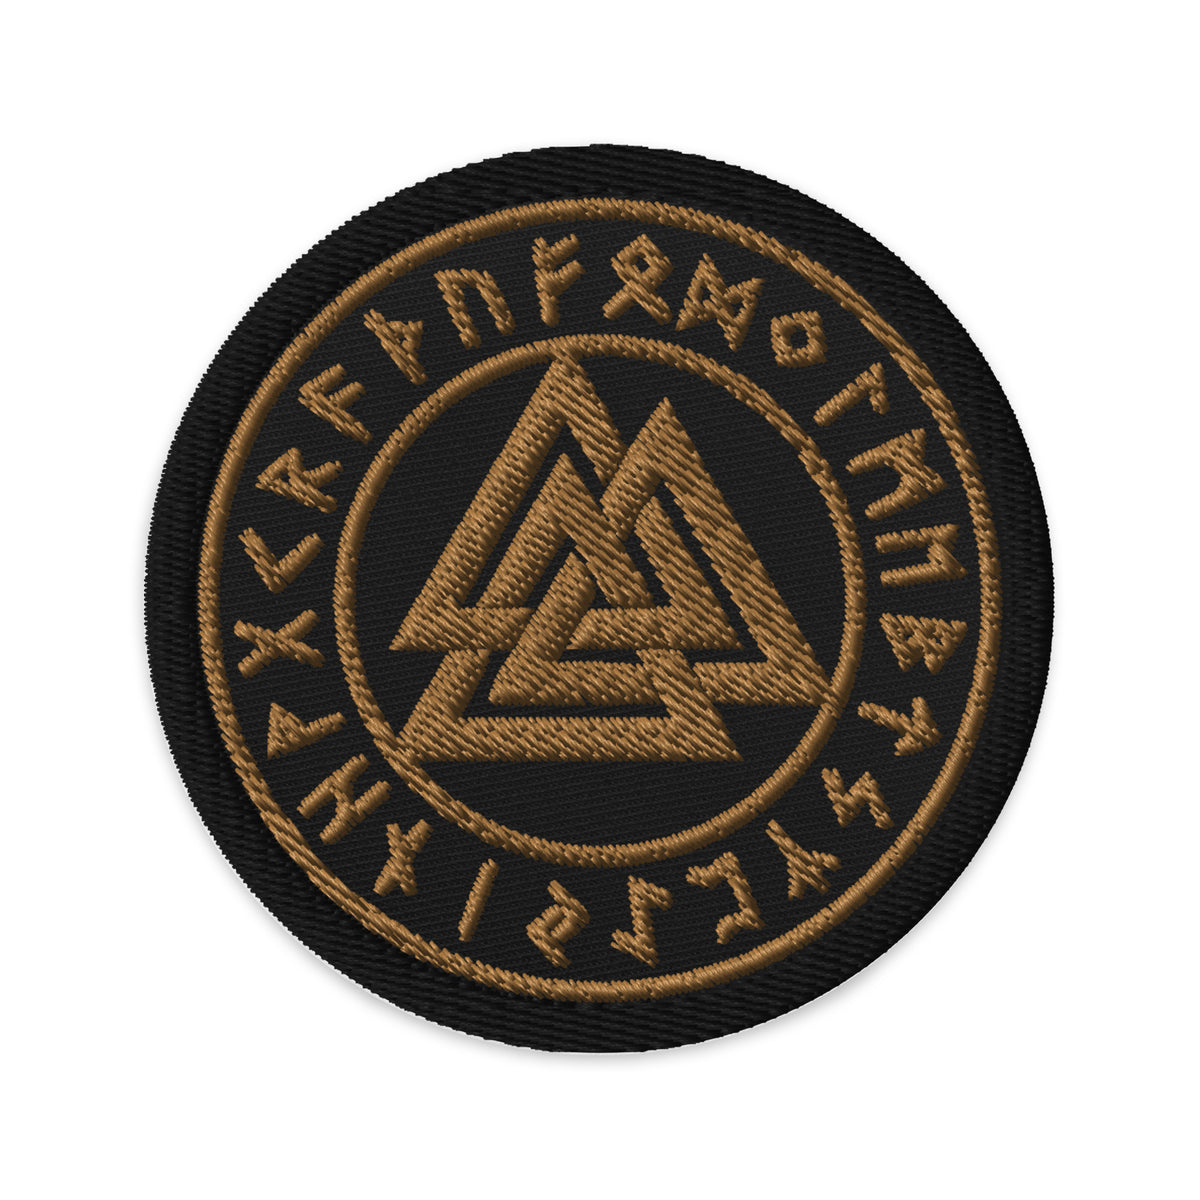 Valknut Embroidered Morale Patch